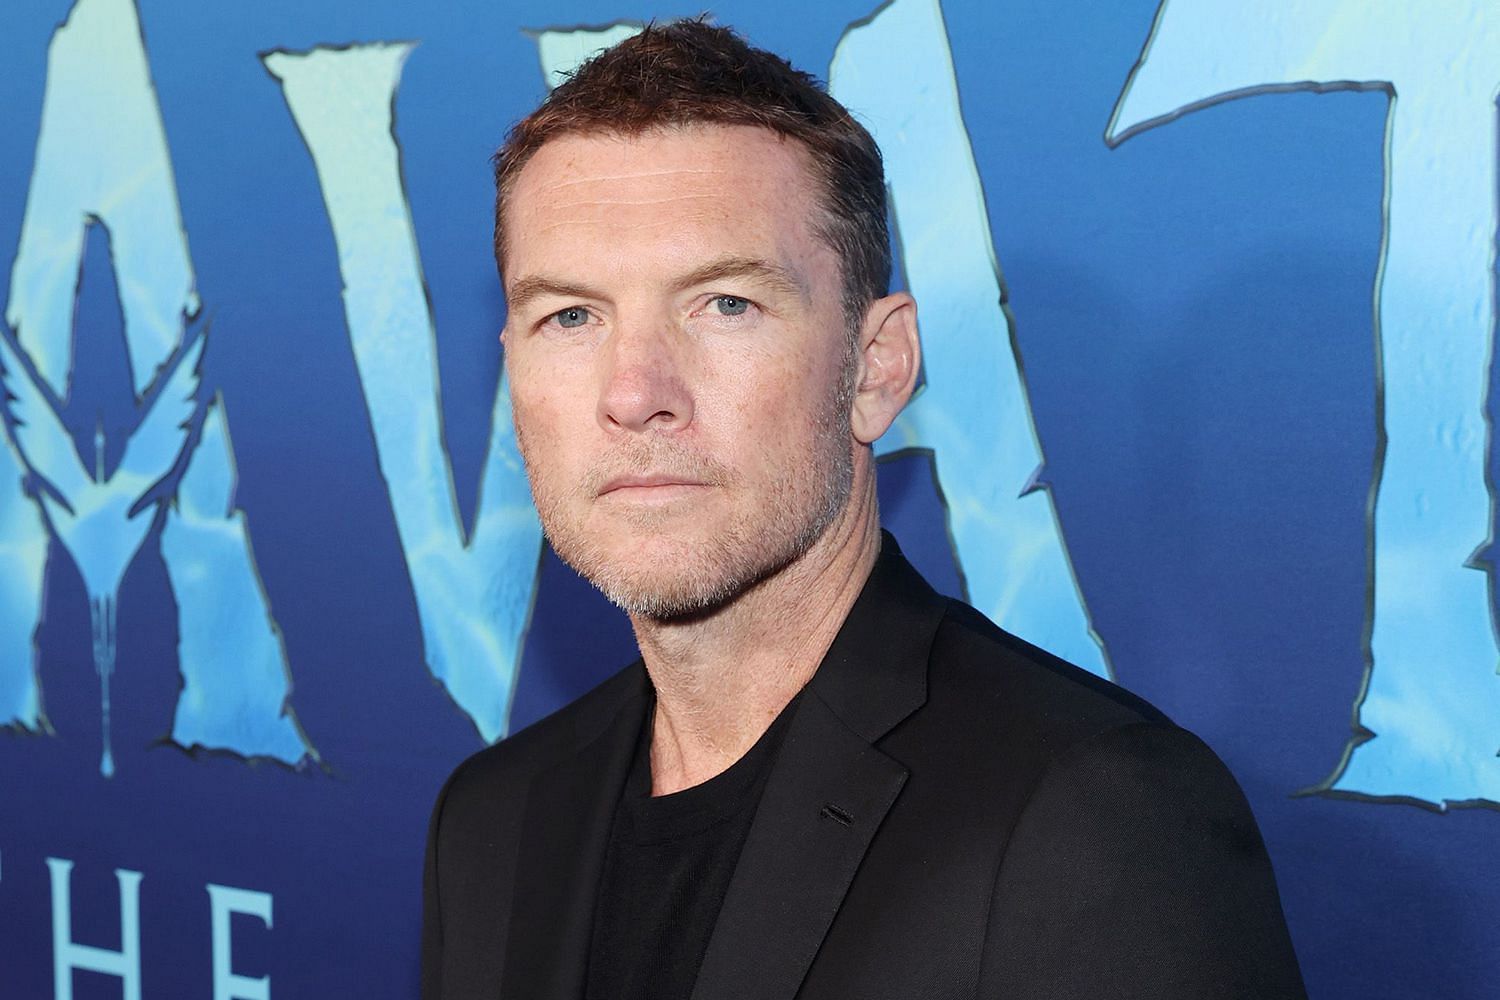 Sam Worthington received an AACTA Award for his role in Somersault (Image Via Jesse Grant/GETTY)